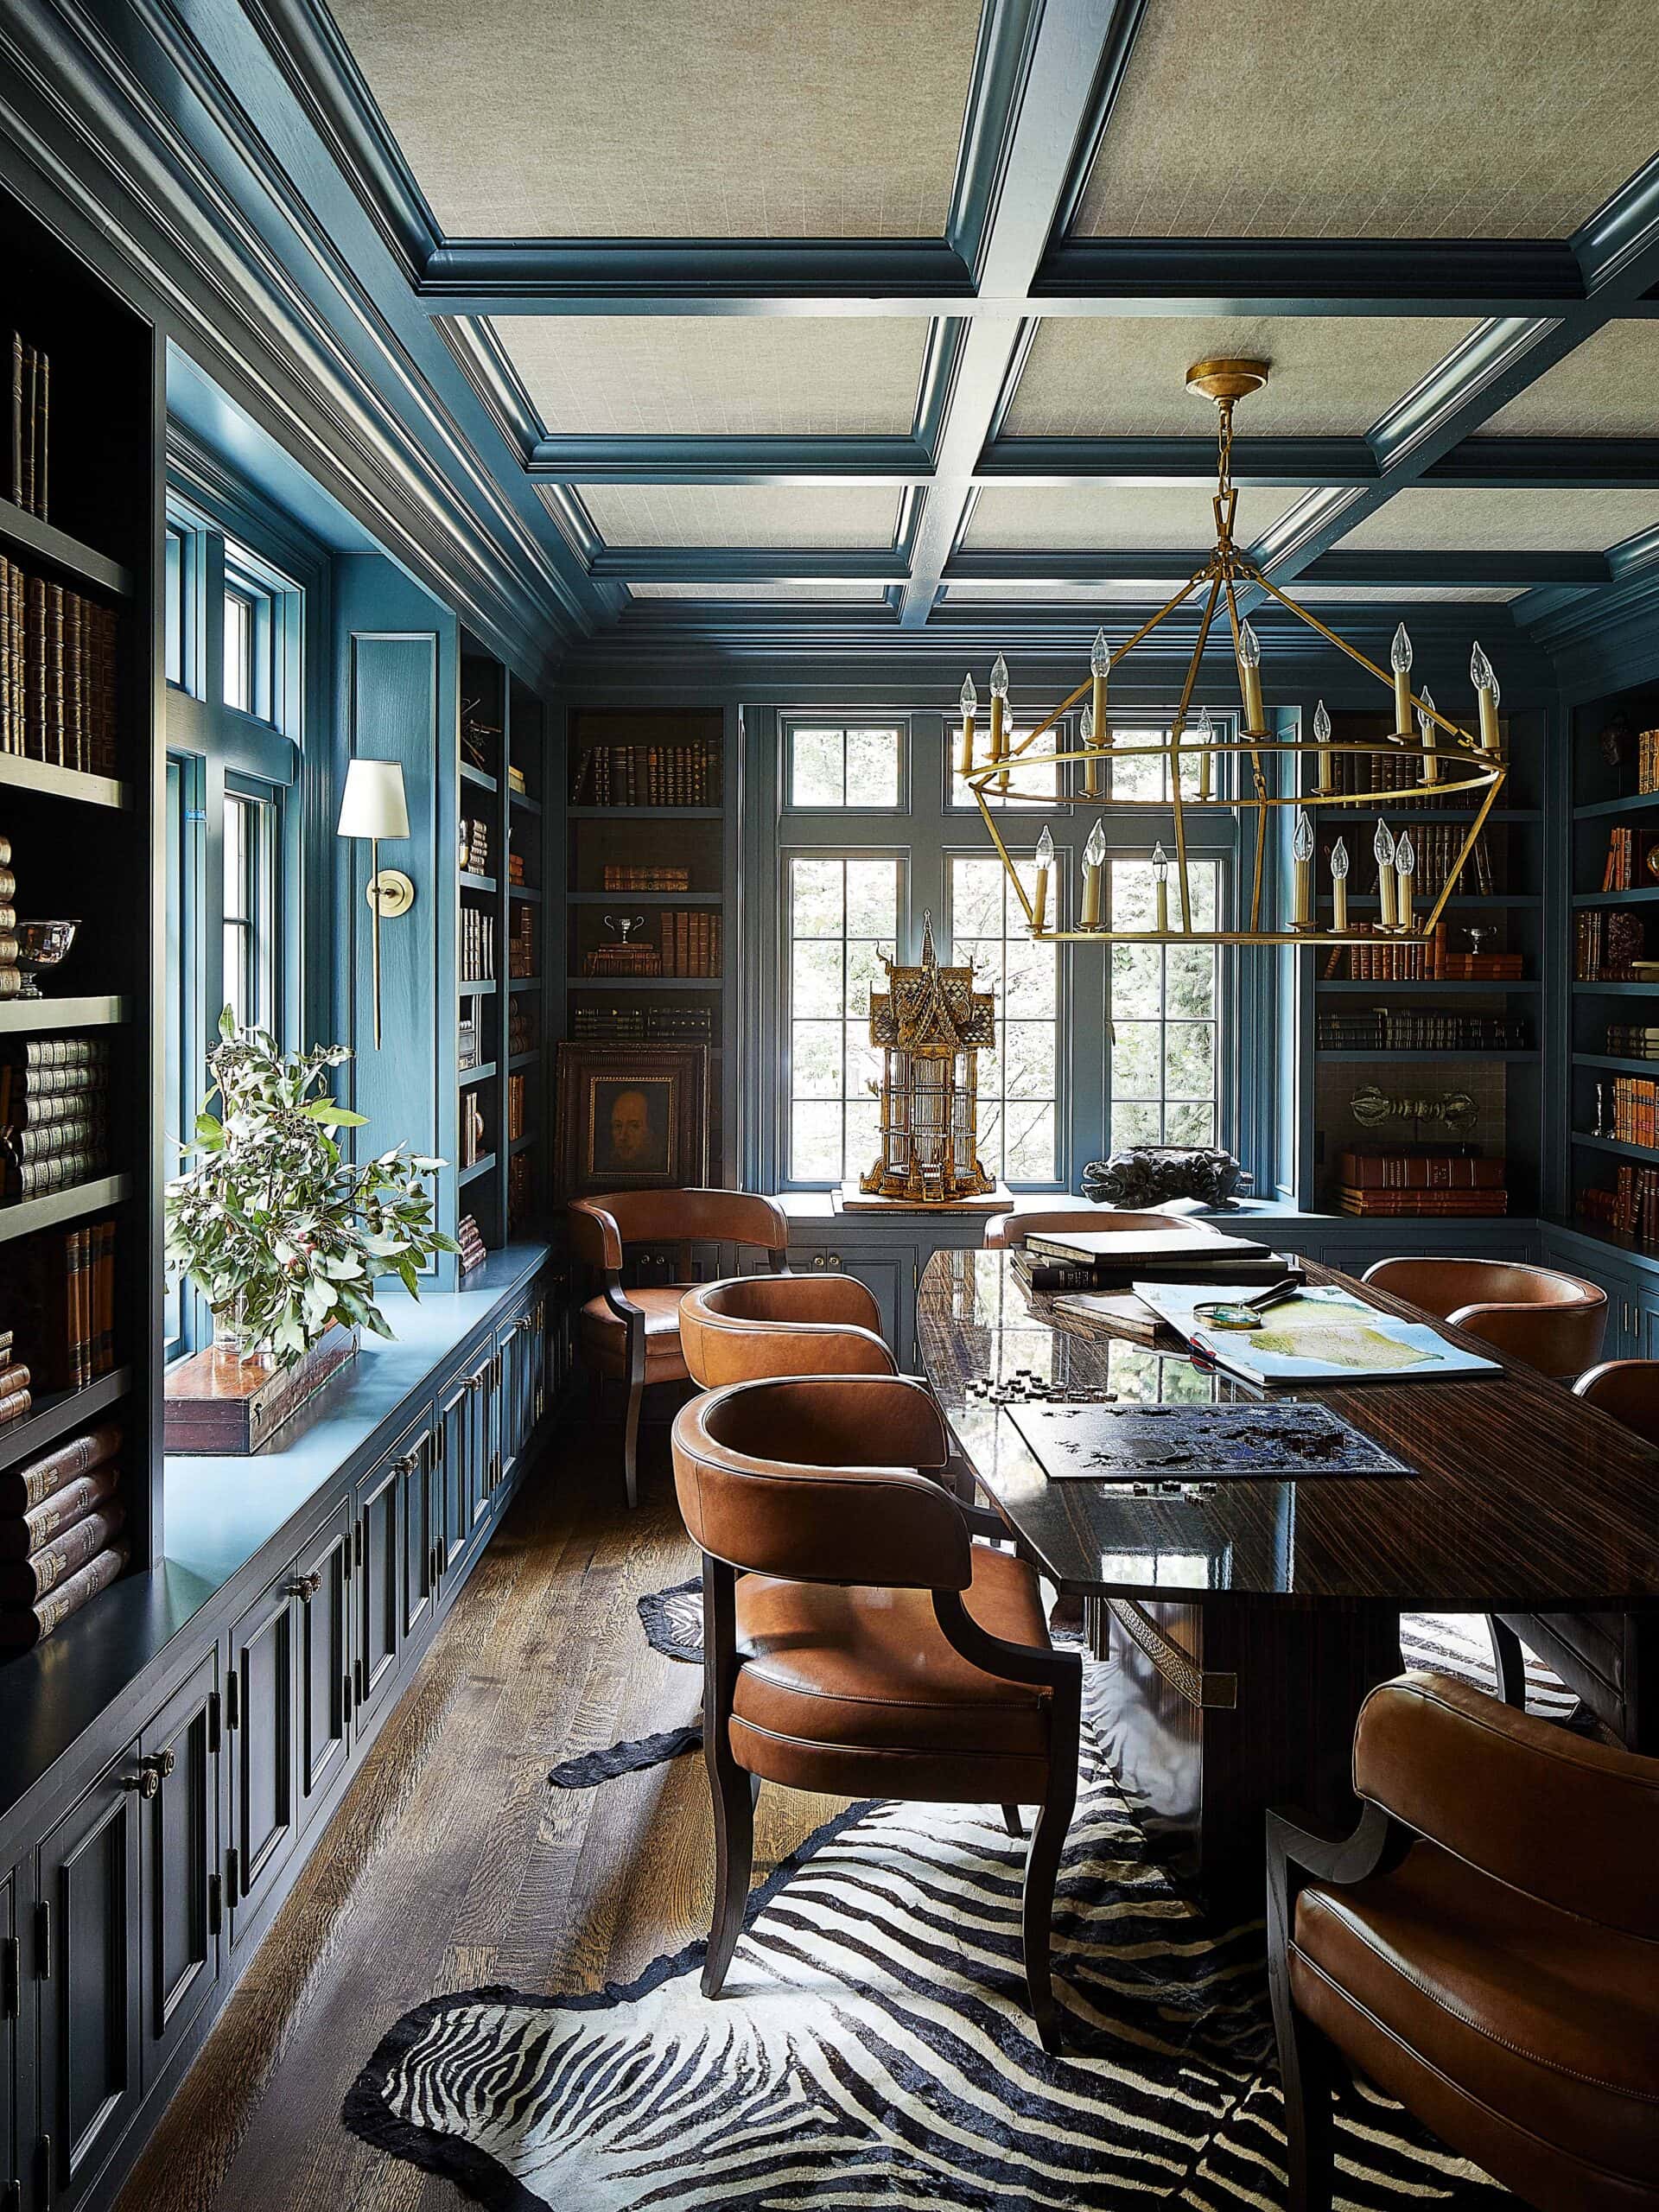 Modern Eclectic Interior Design library with blue built ins and zebra rug